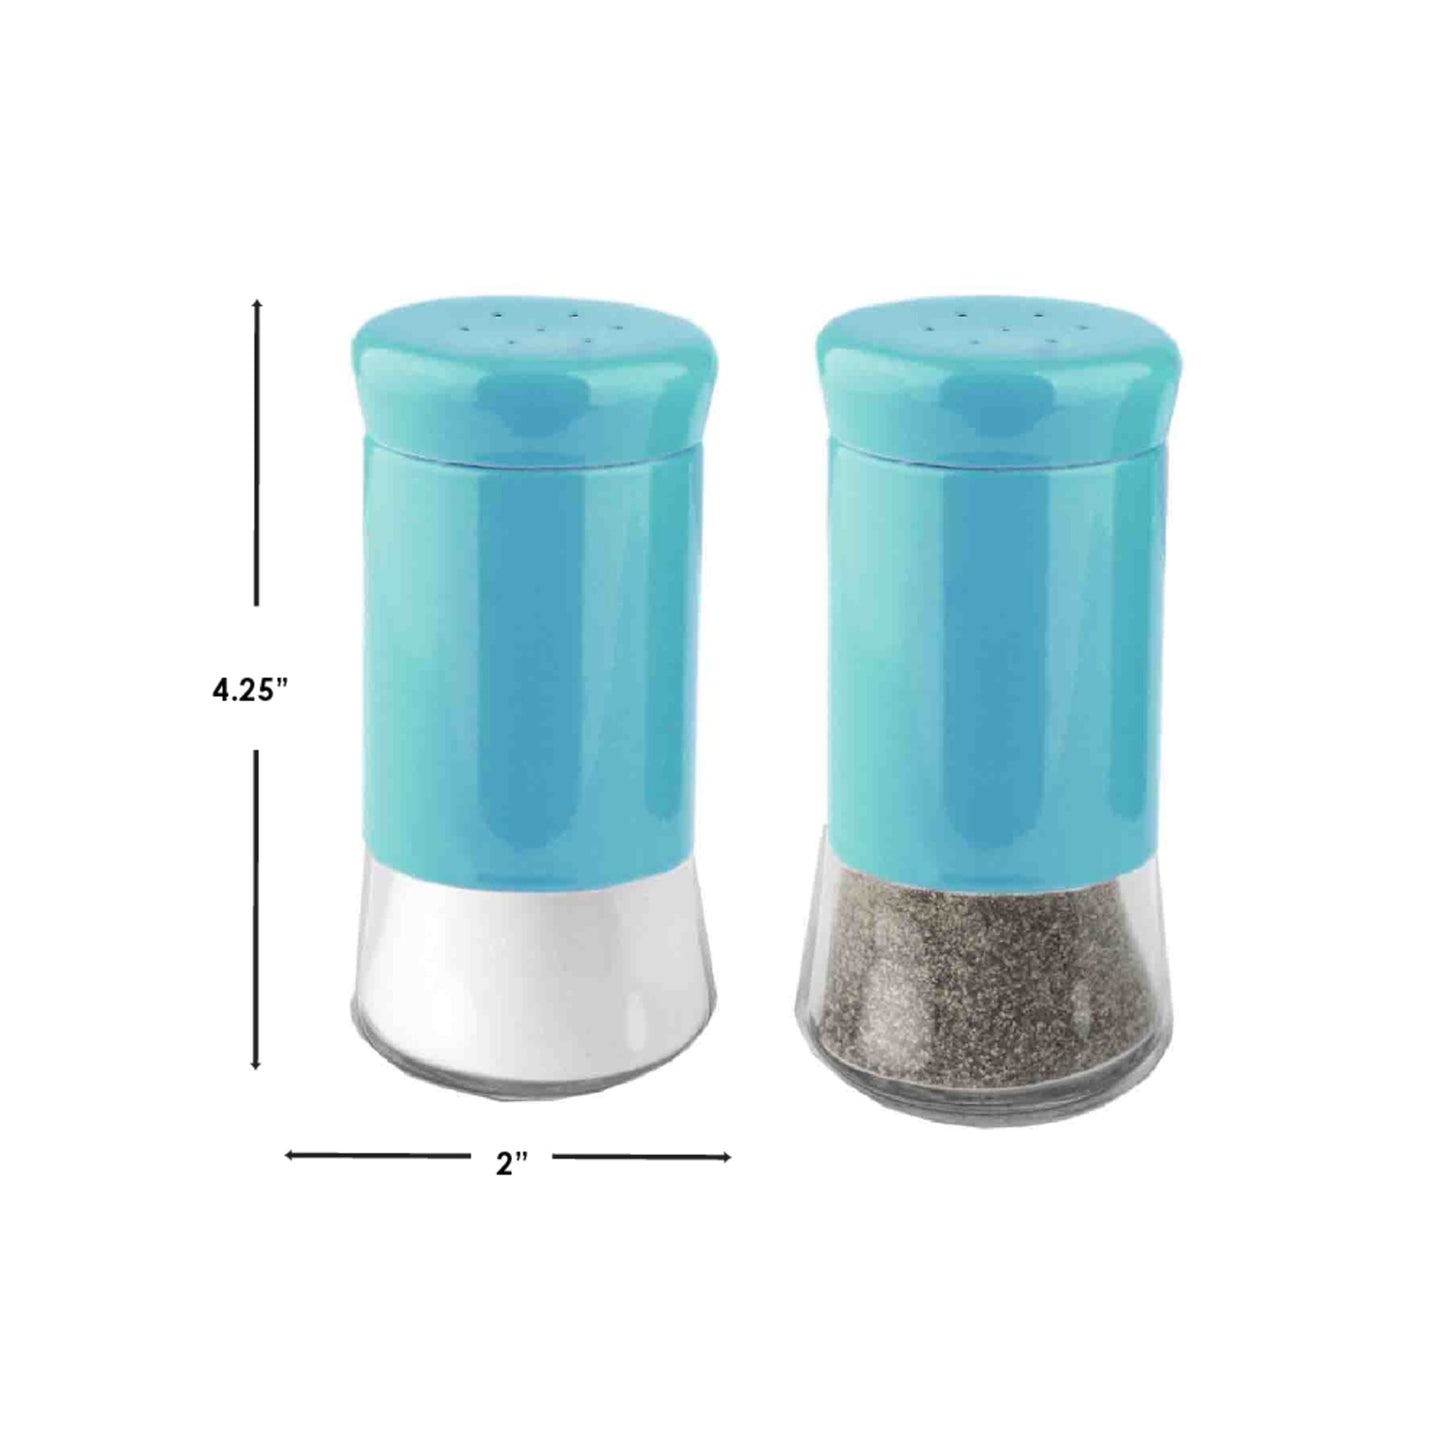 Essence Collection 2 Piece Salt and Pepper Set, Turquoise